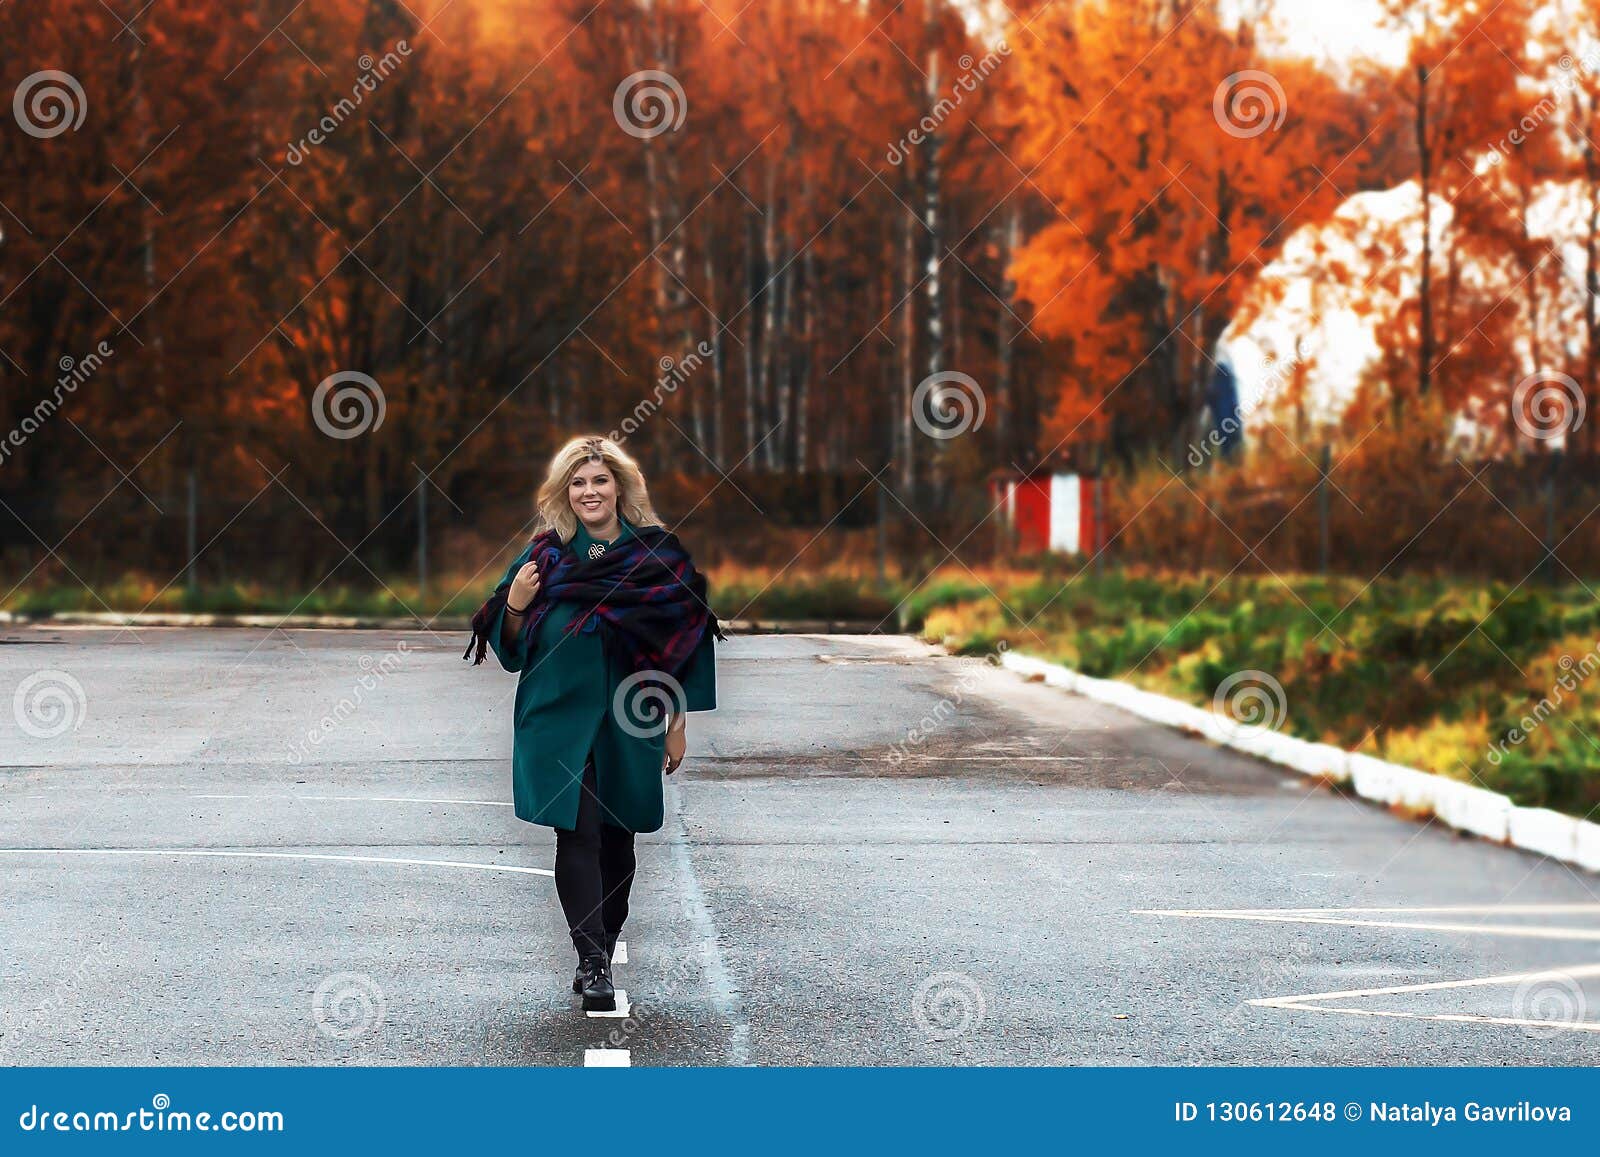 Fat Beautiful Girl Outside in Autumn Stock Photo - Image of cute, model ...